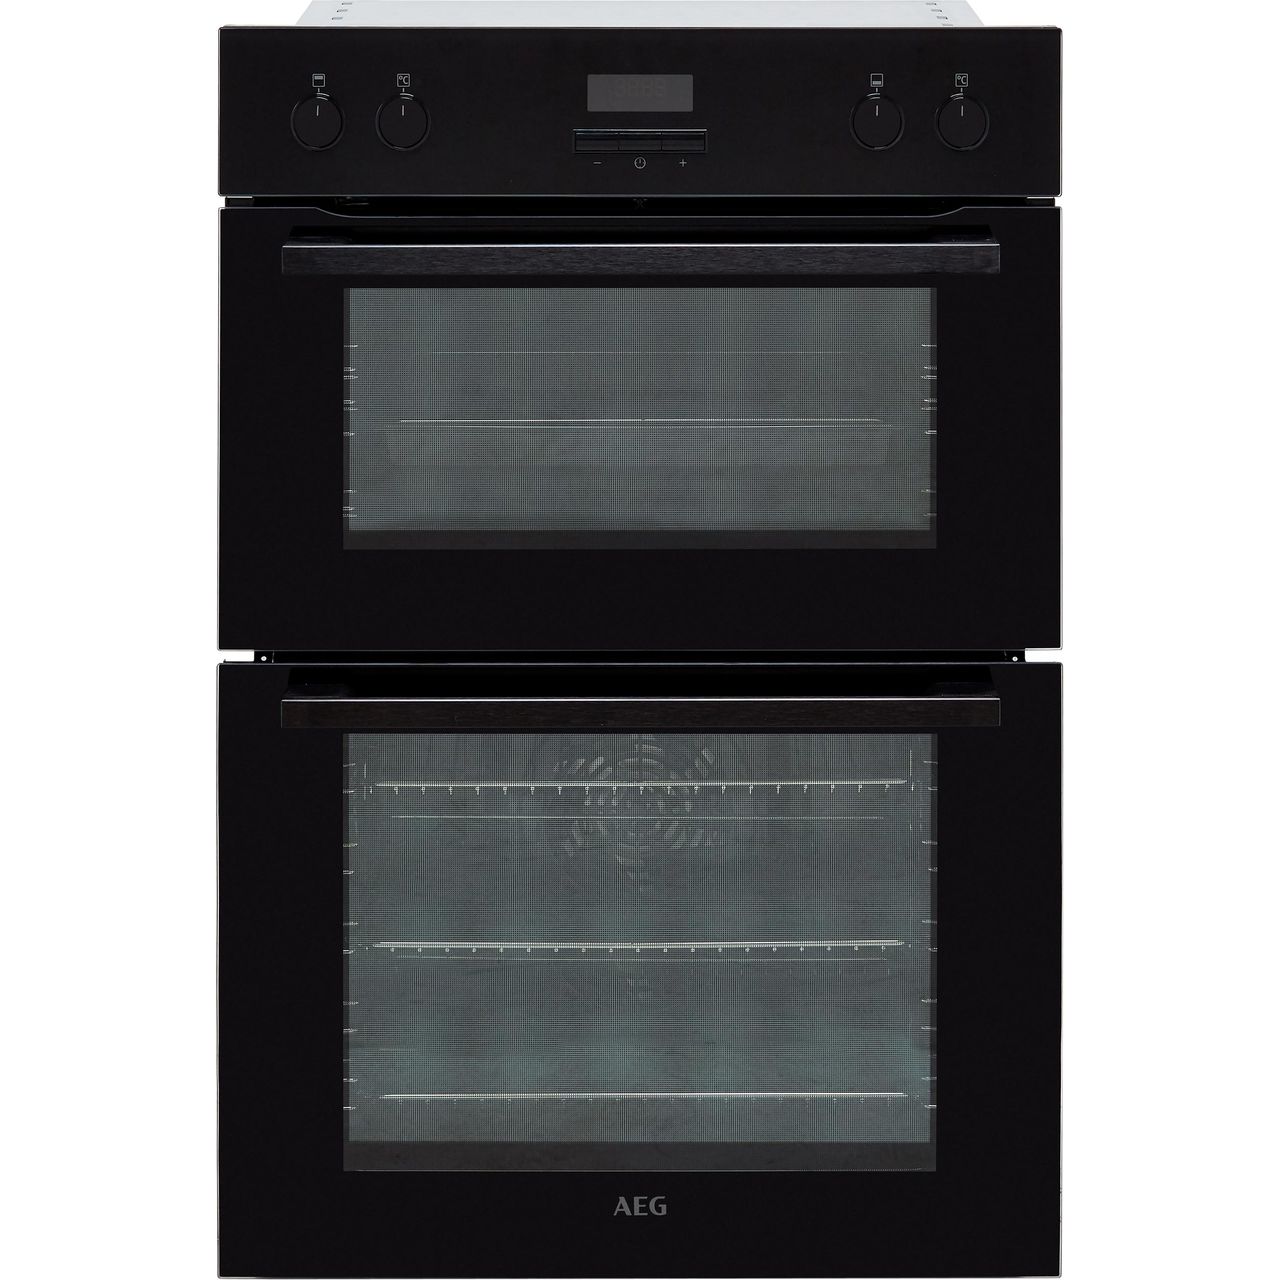 AEG DEE431010B Built In Double Oven Review